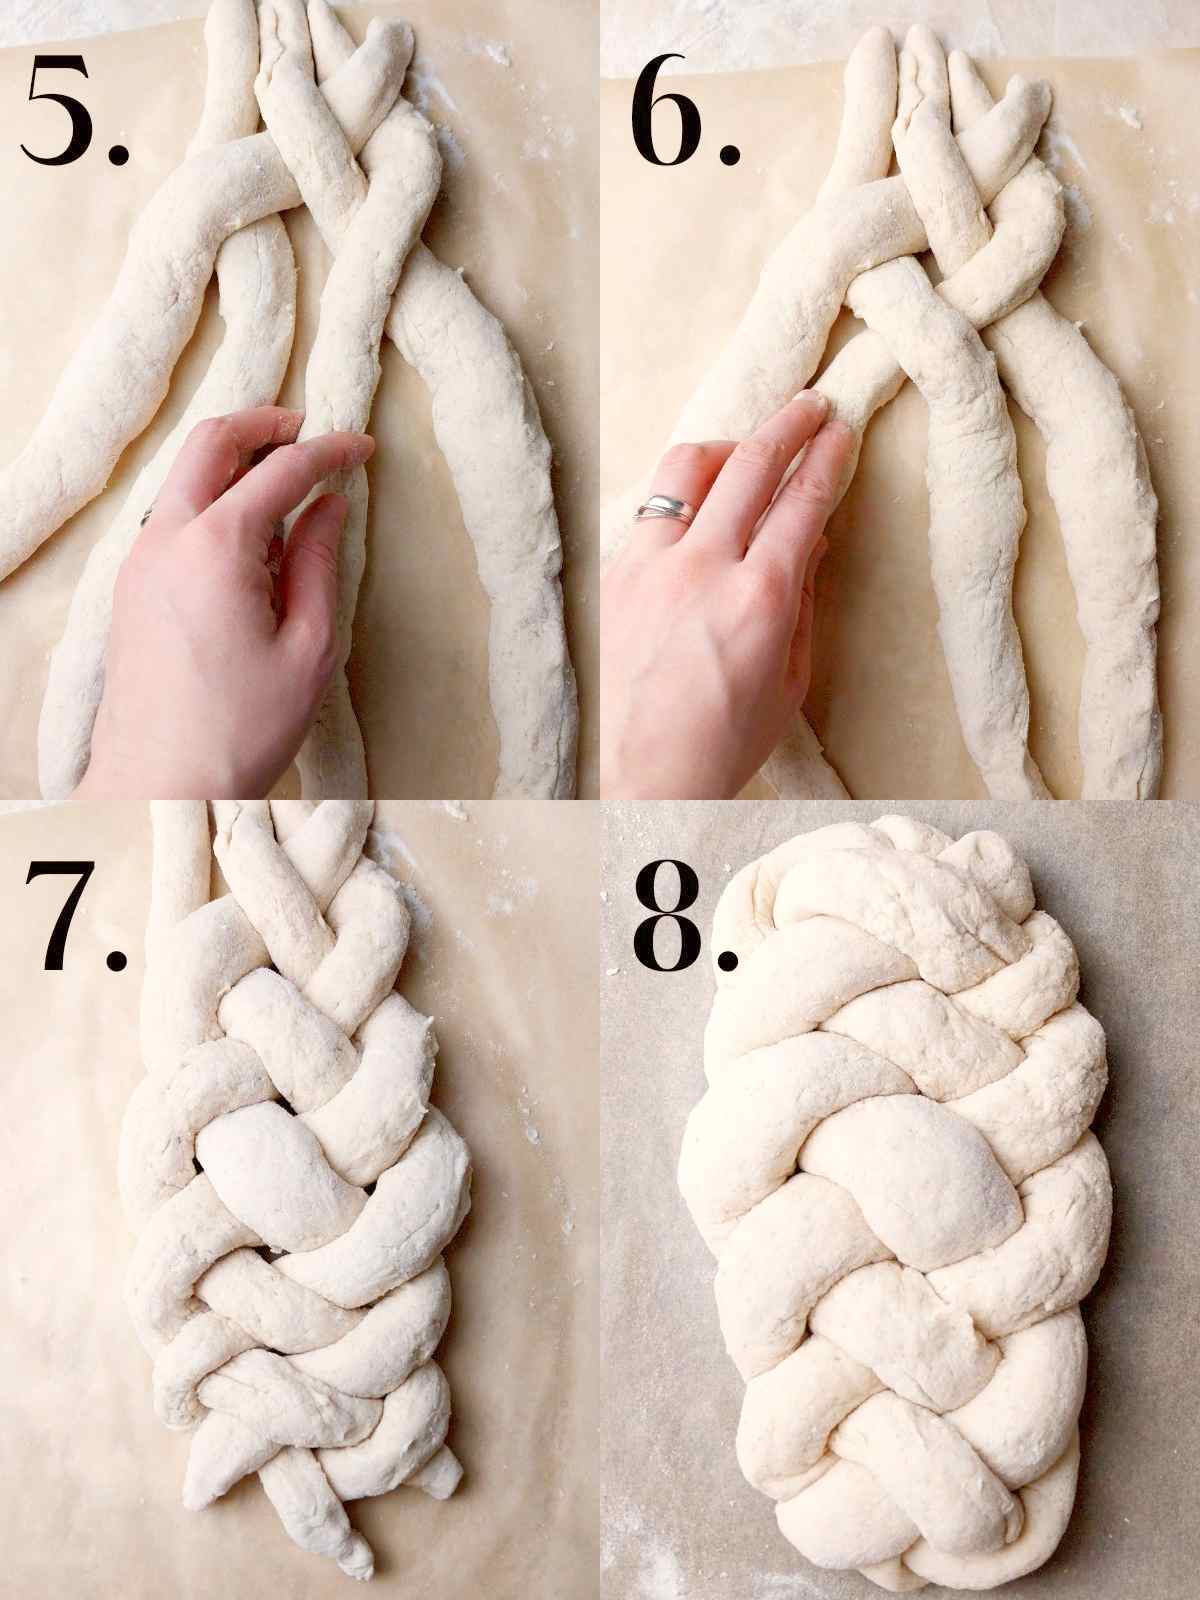 The last four steps in braiding the challah.